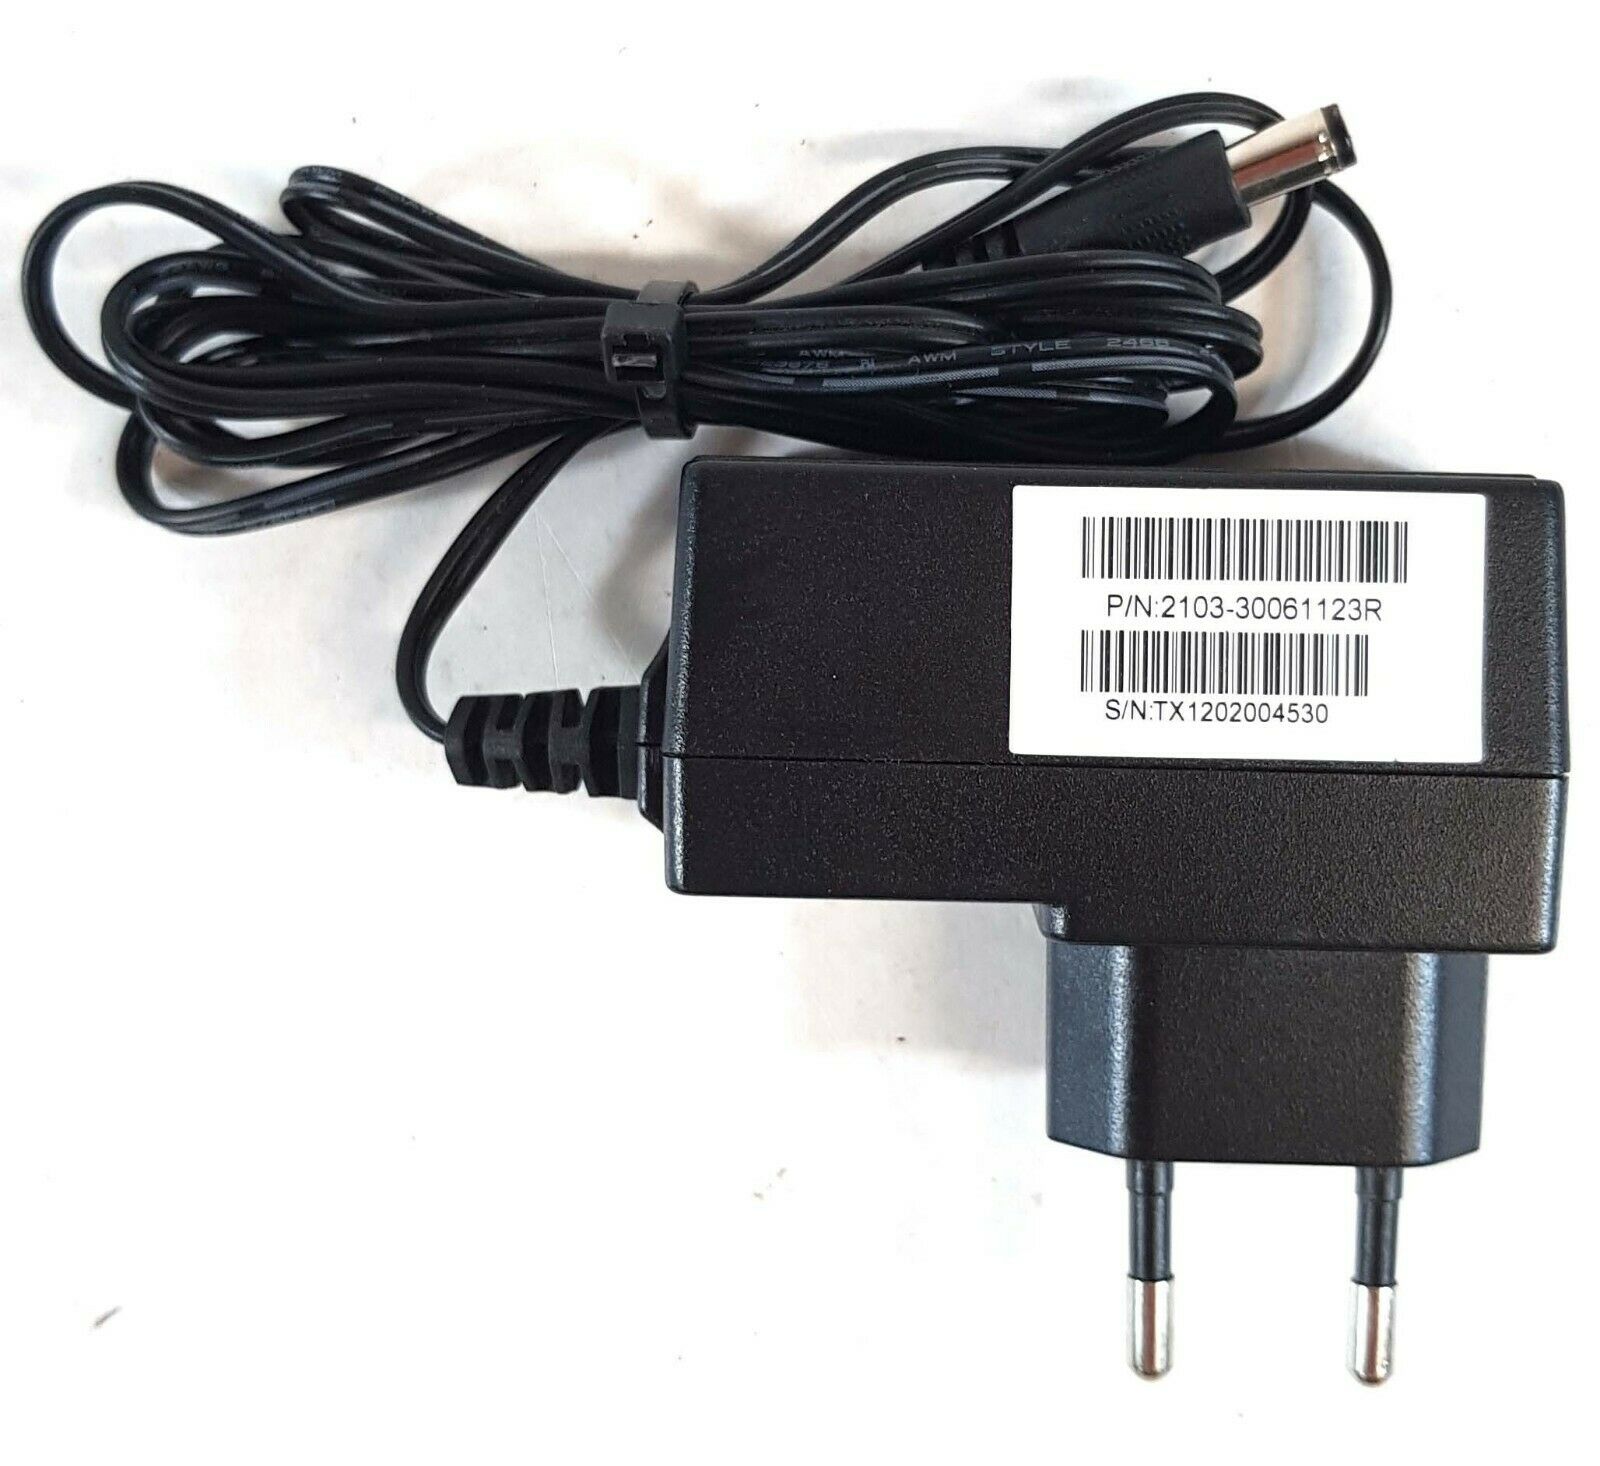 Leader Electronics MU08-6120050-C5 AC Power Adapter 12V 0.5A Genuine Supply B293 Output Current: 0.5 A Compatible Bra